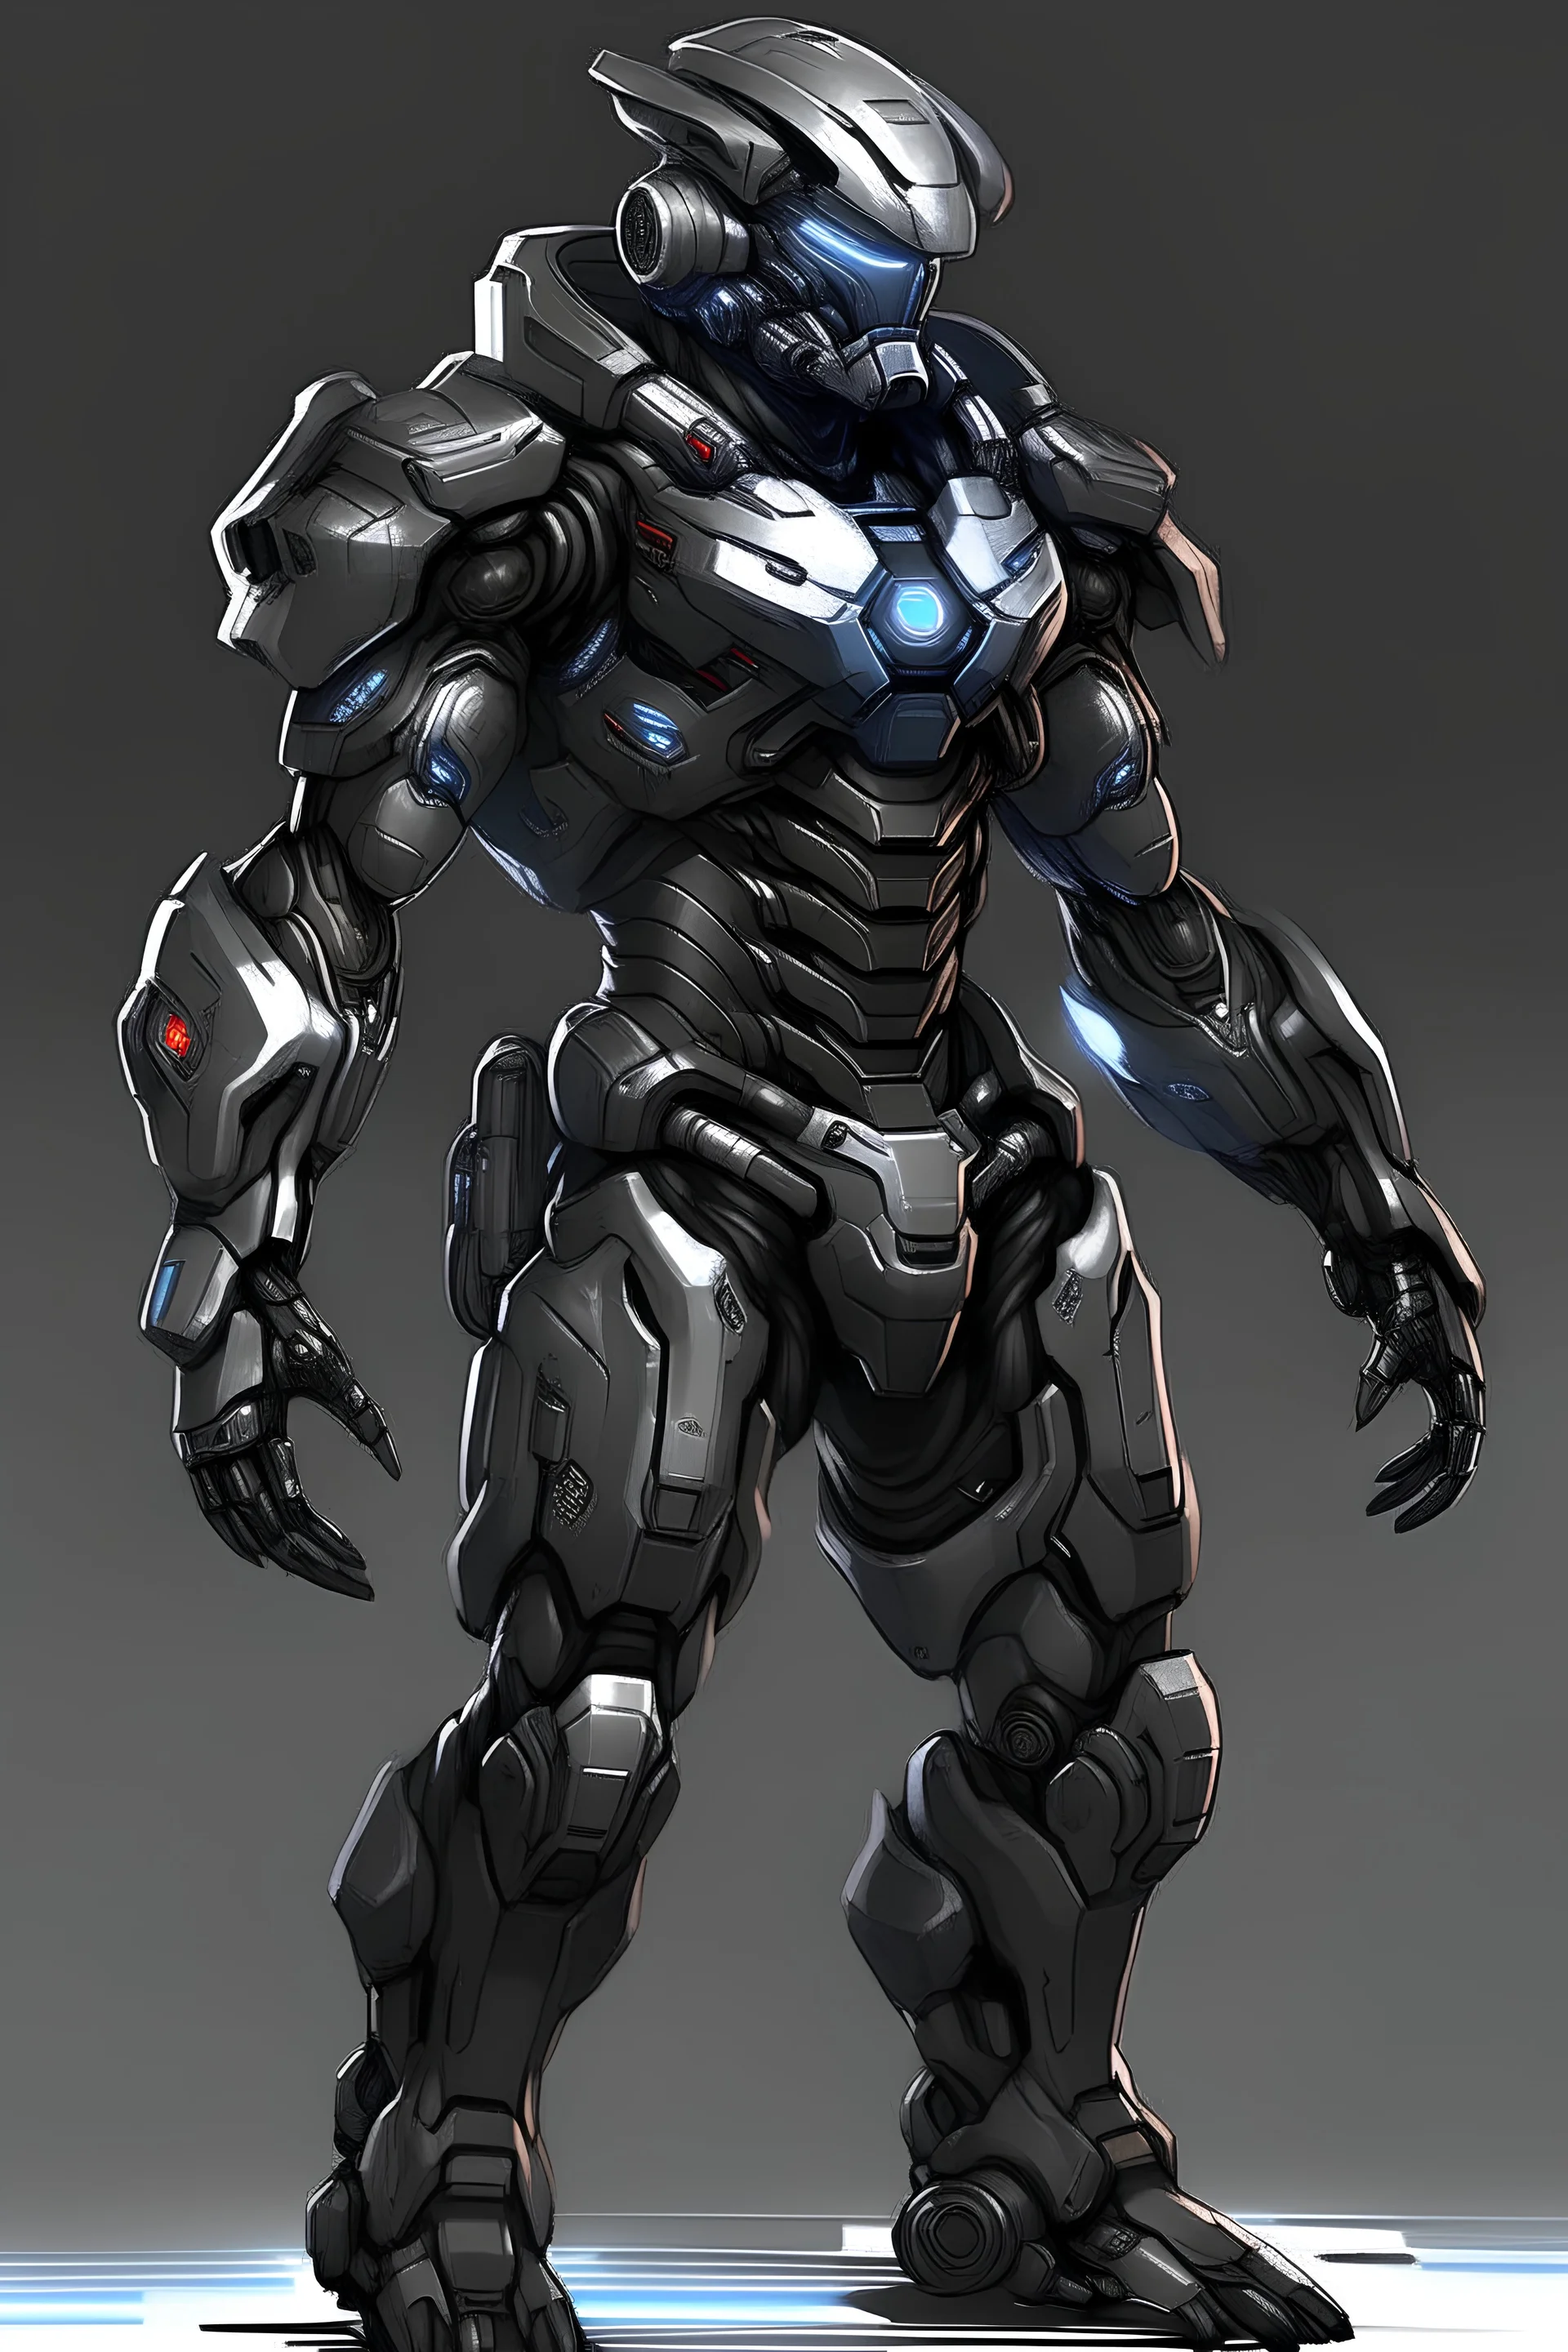 hitjoban as a futureristic with armor and special abilities as a game character more sci fi and futuristic lighter armor more sci fi more futuristic 100 times more less halo a super armor more bodysupporting as demon